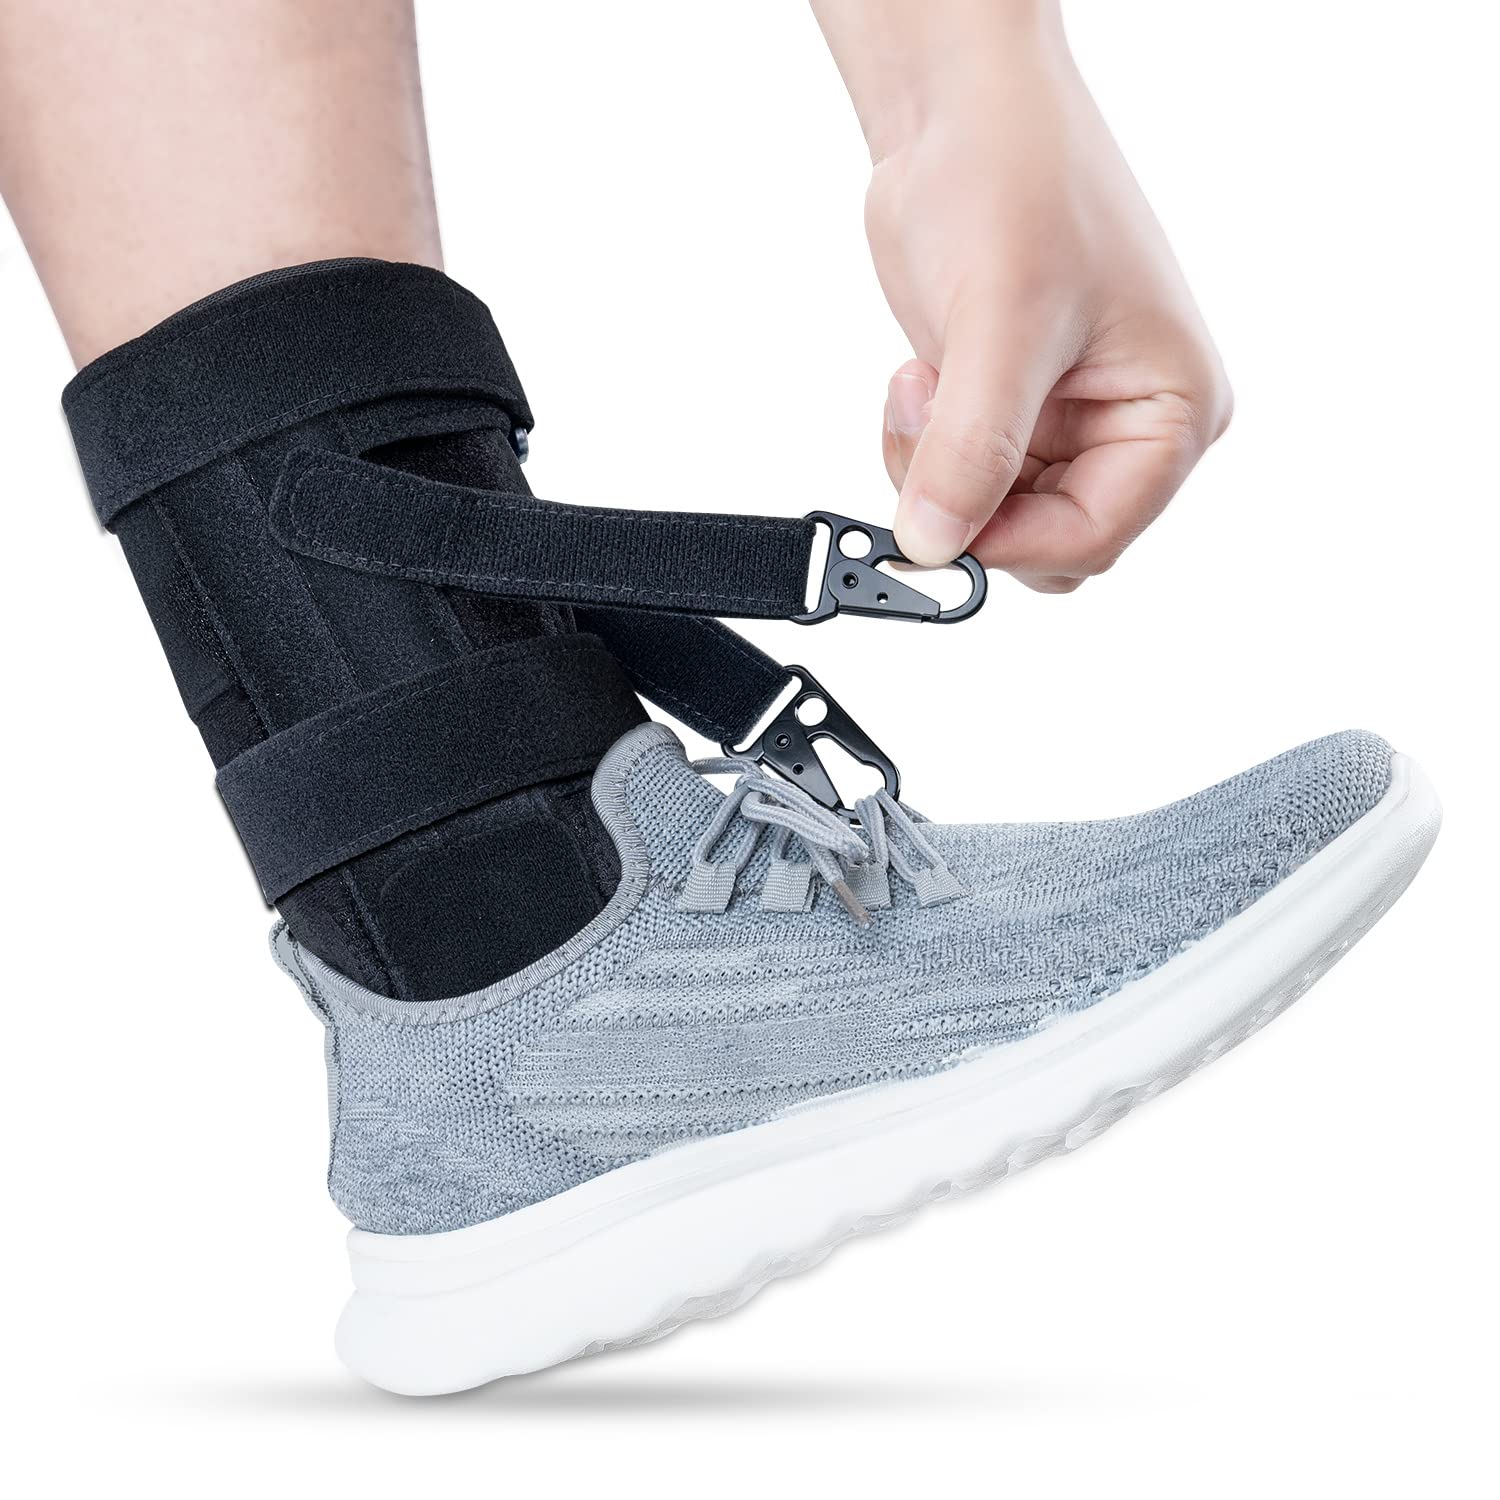 Sylong Afo Foot Drop Brace for Walking with Shoes Left [...]